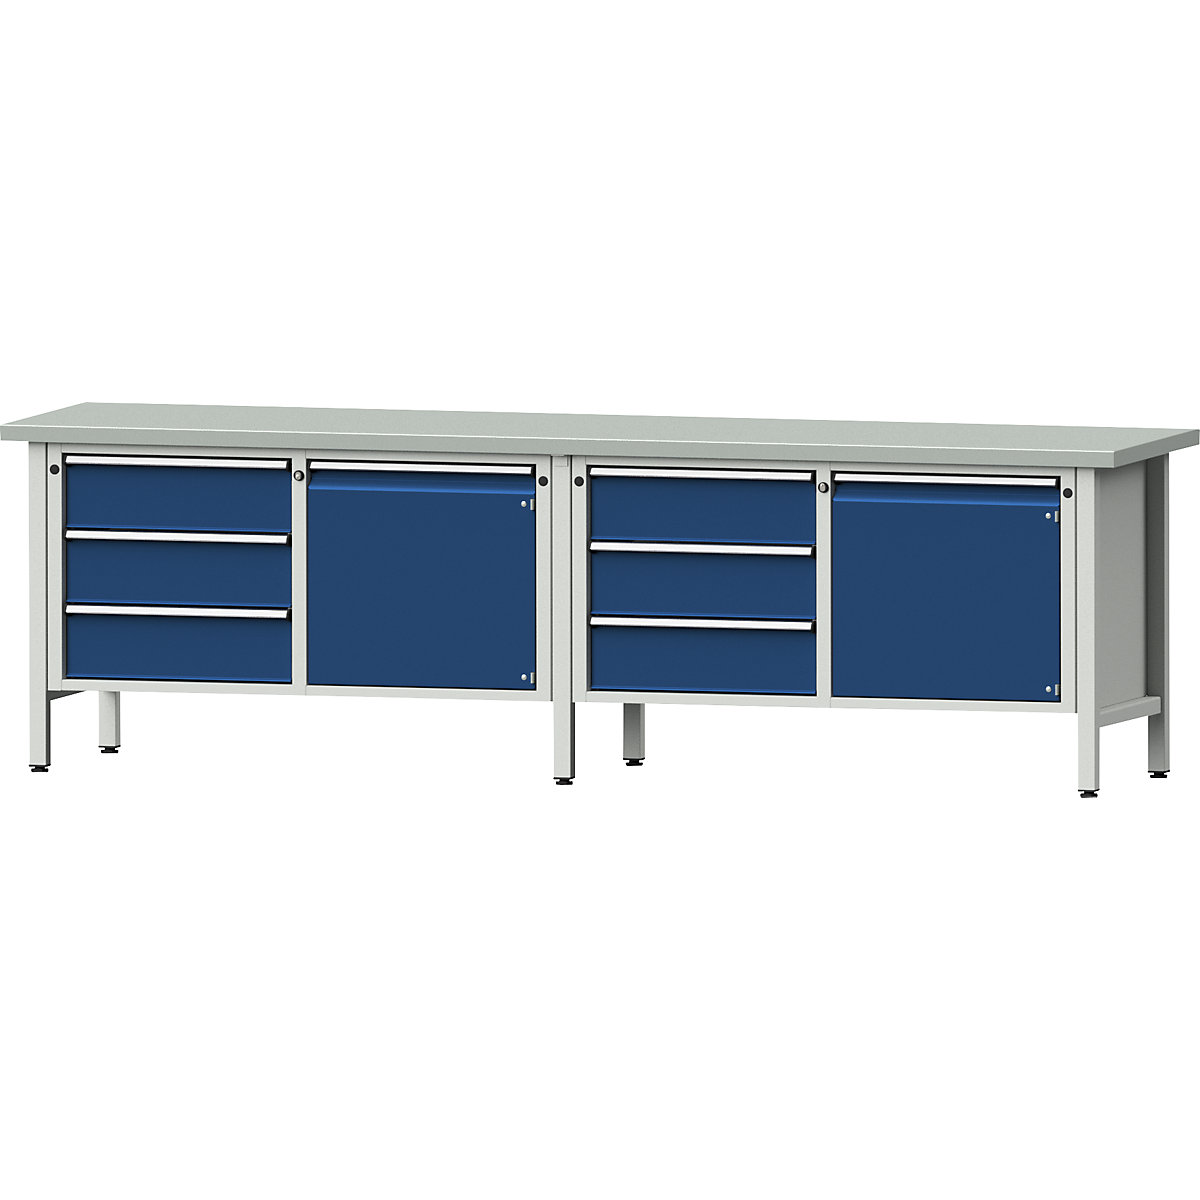 Workbench width 2800 mm, frame construction – ANKE, 2 doors, 6 drawers with partial extension, sheet steel covered worktop-8